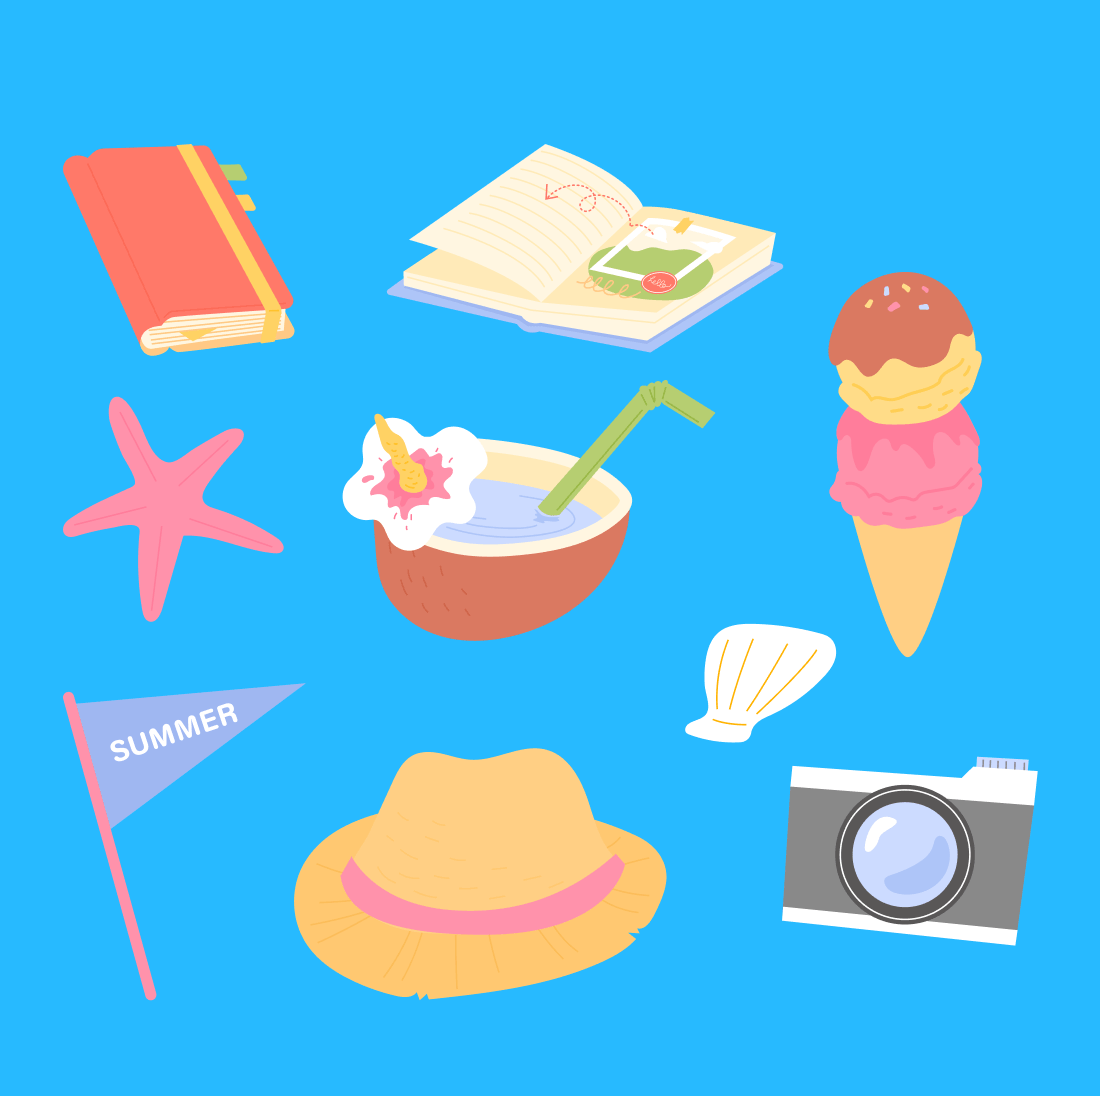 A book, ice cream, a camera - everything you need for a summer vacation.